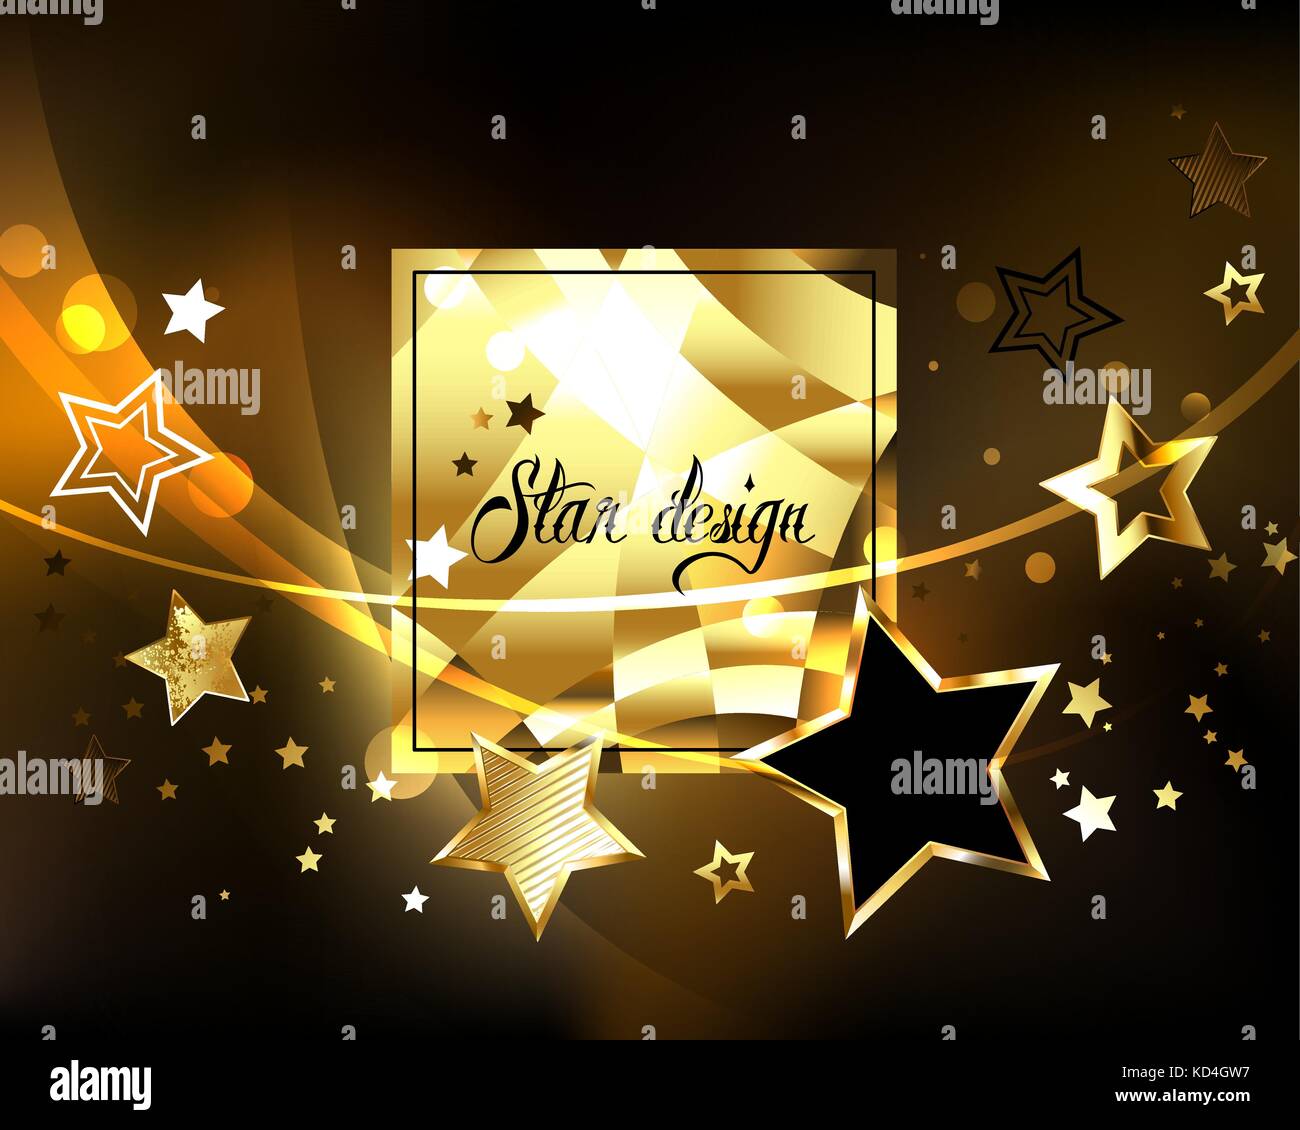 Polygonal, golden, square banner with golden shining stars on a black, cosmic background. Design with gold stars. Golden Star. Stock Vector